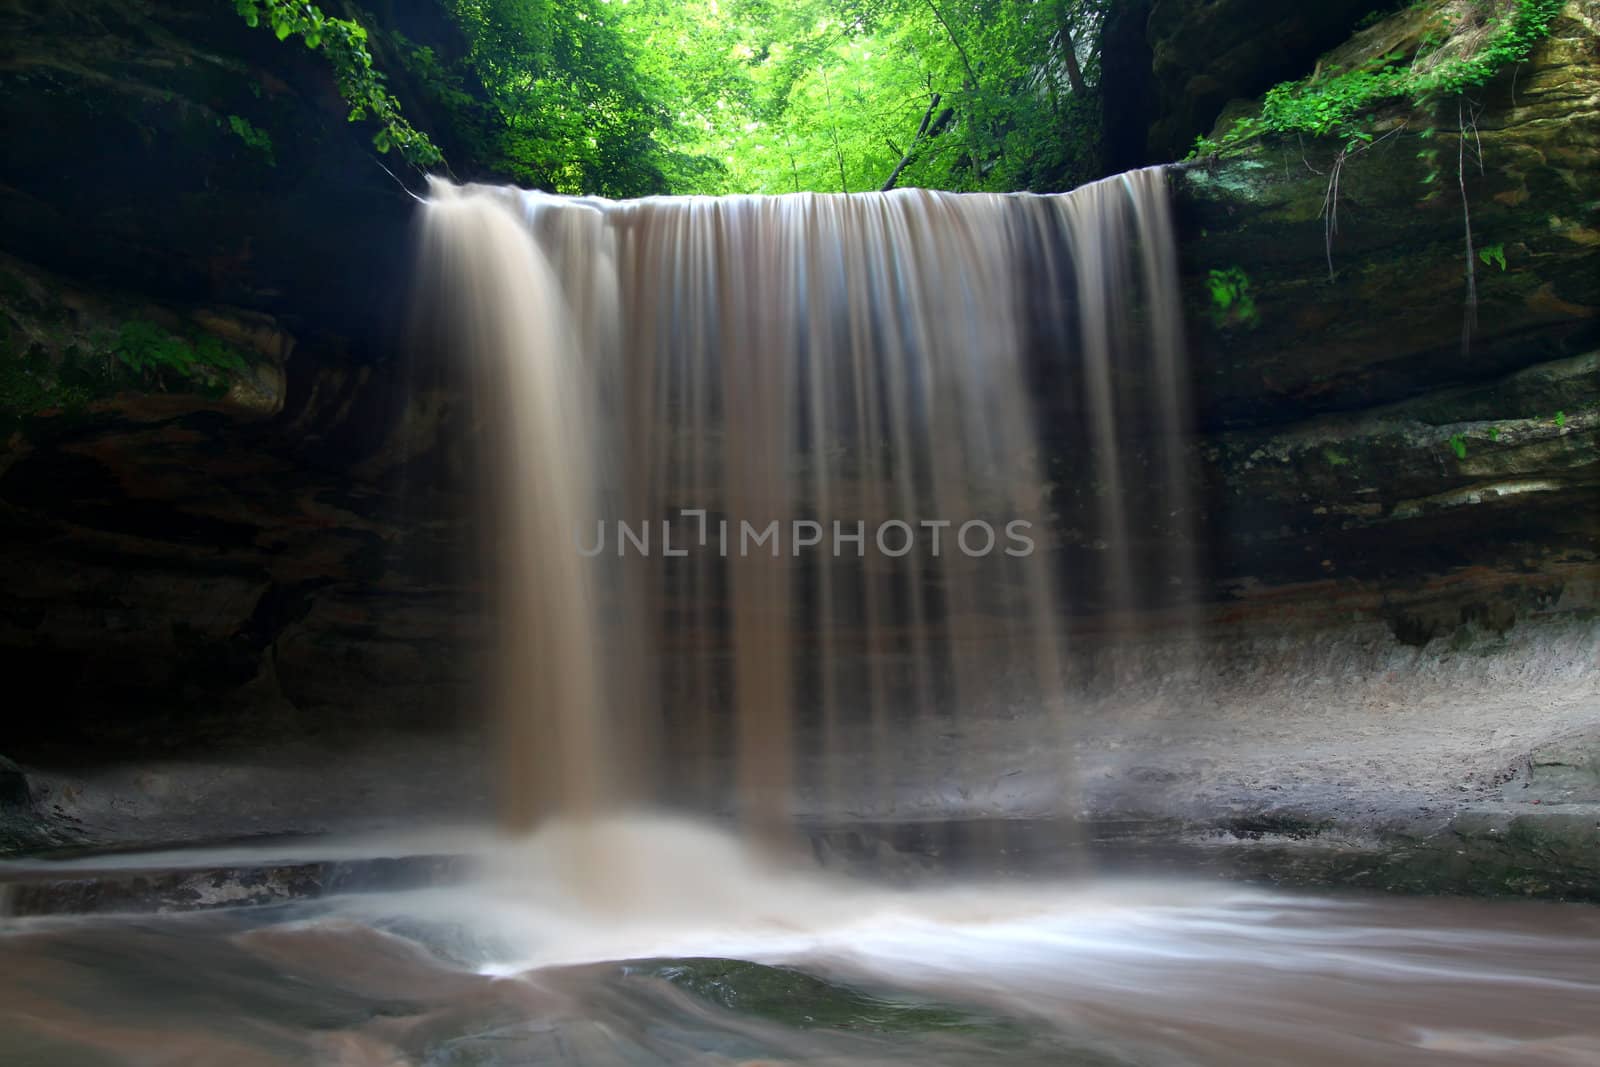 Spring rains create a beautiful scene at Lasalle Falls of Starved Rock State Park in central Illinois.